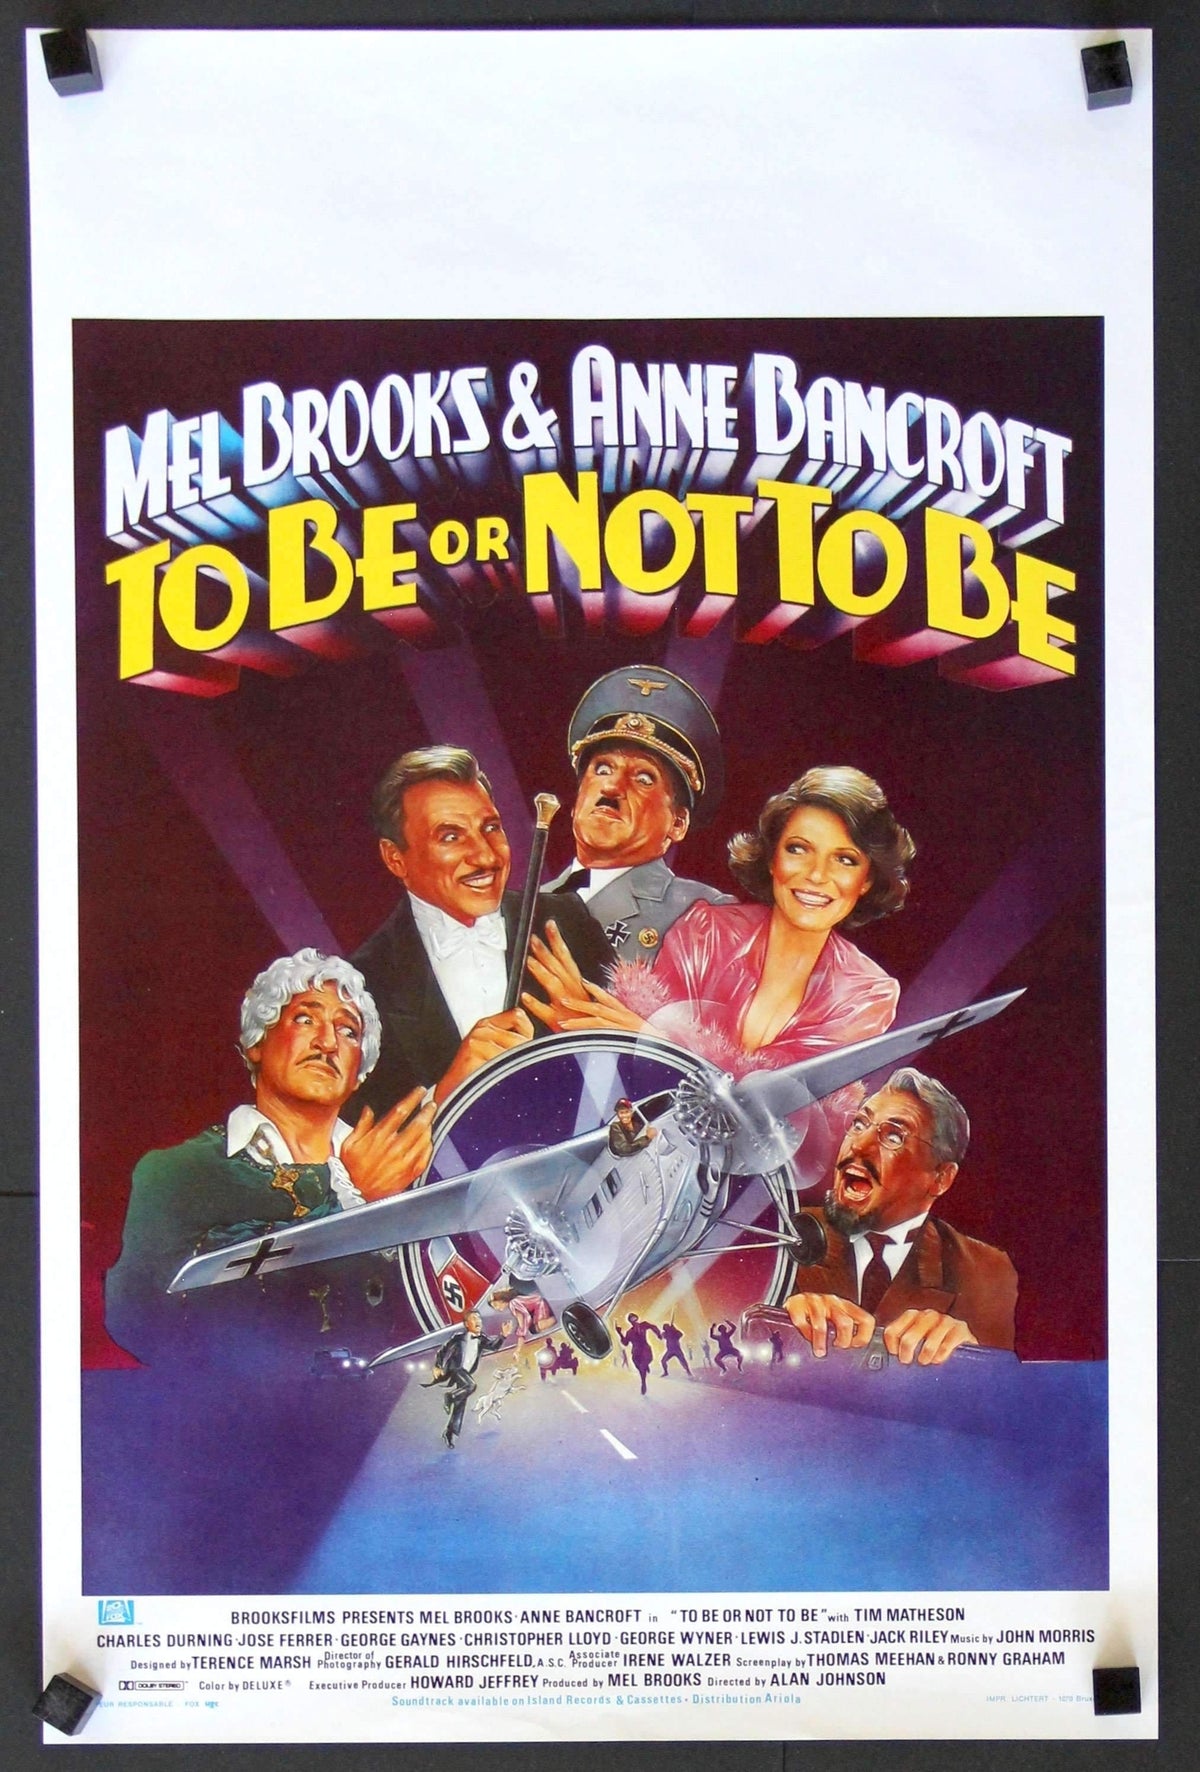 To Be or Not to Be (1983) original movie poster for sale at Original Film Art